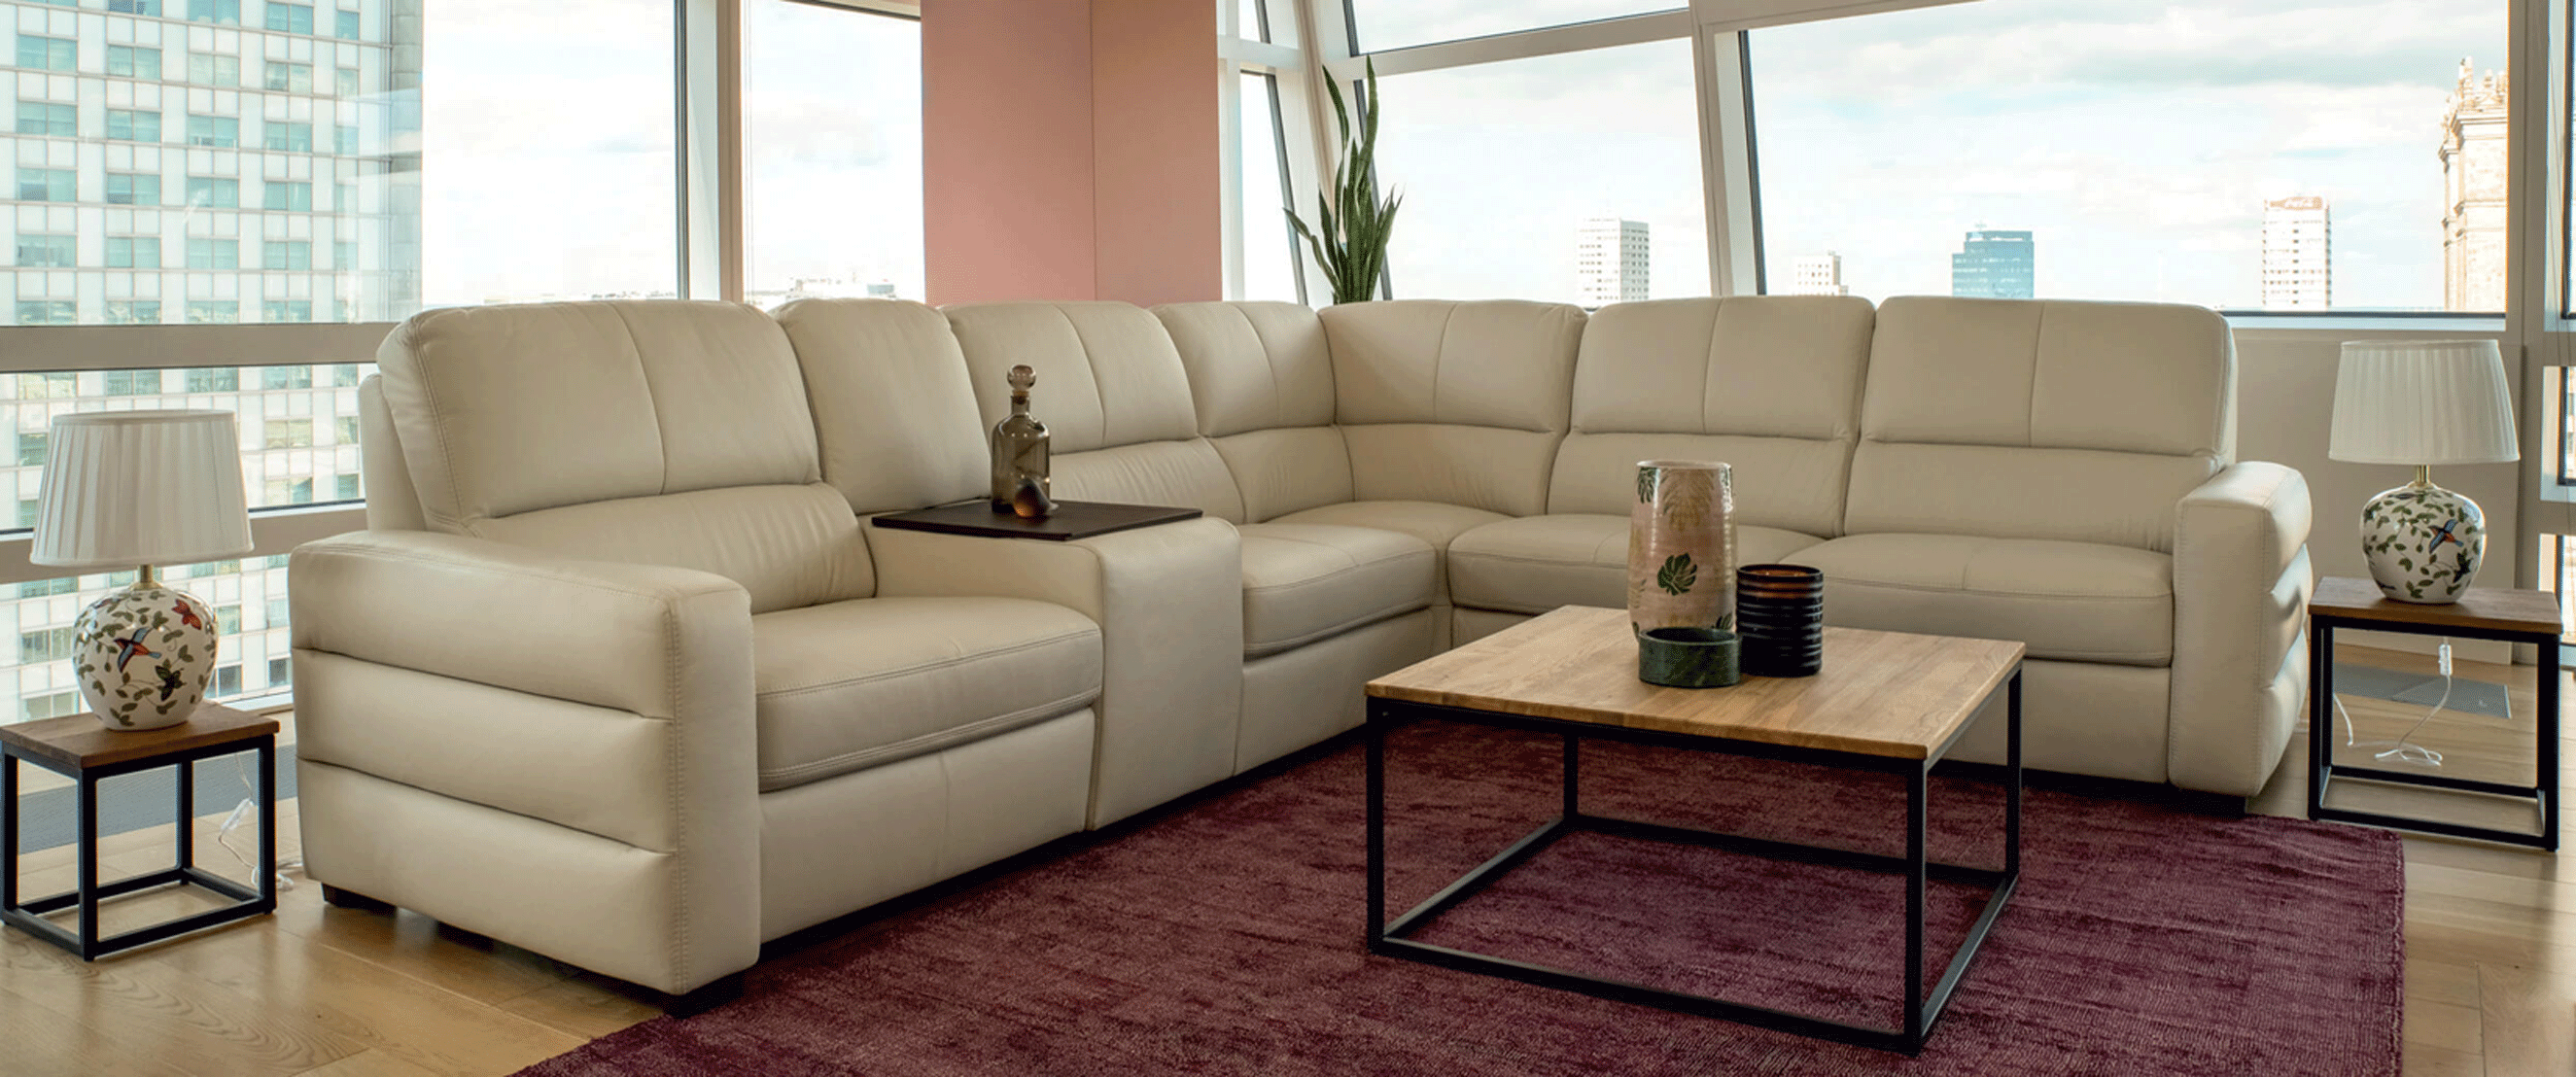 Living Room Furniture Sofas Loveseats and Chairs Karten Sectional